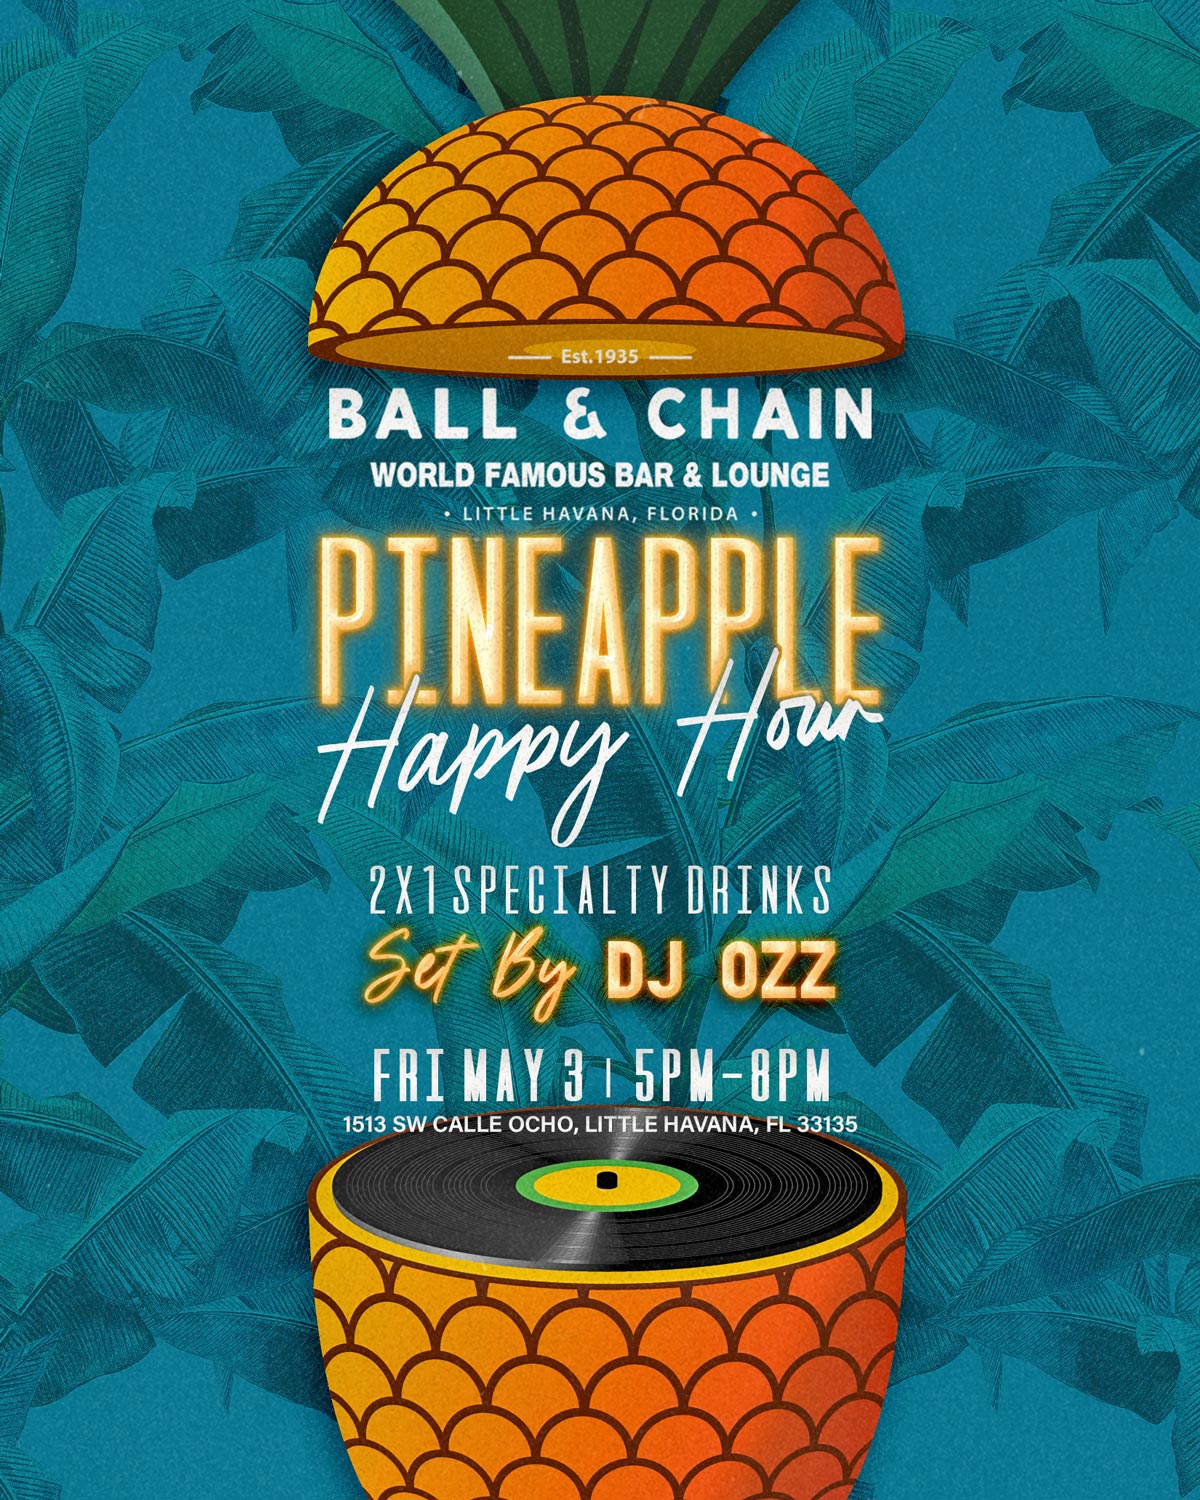 pineapple top and bottom separating to reveal invitation text